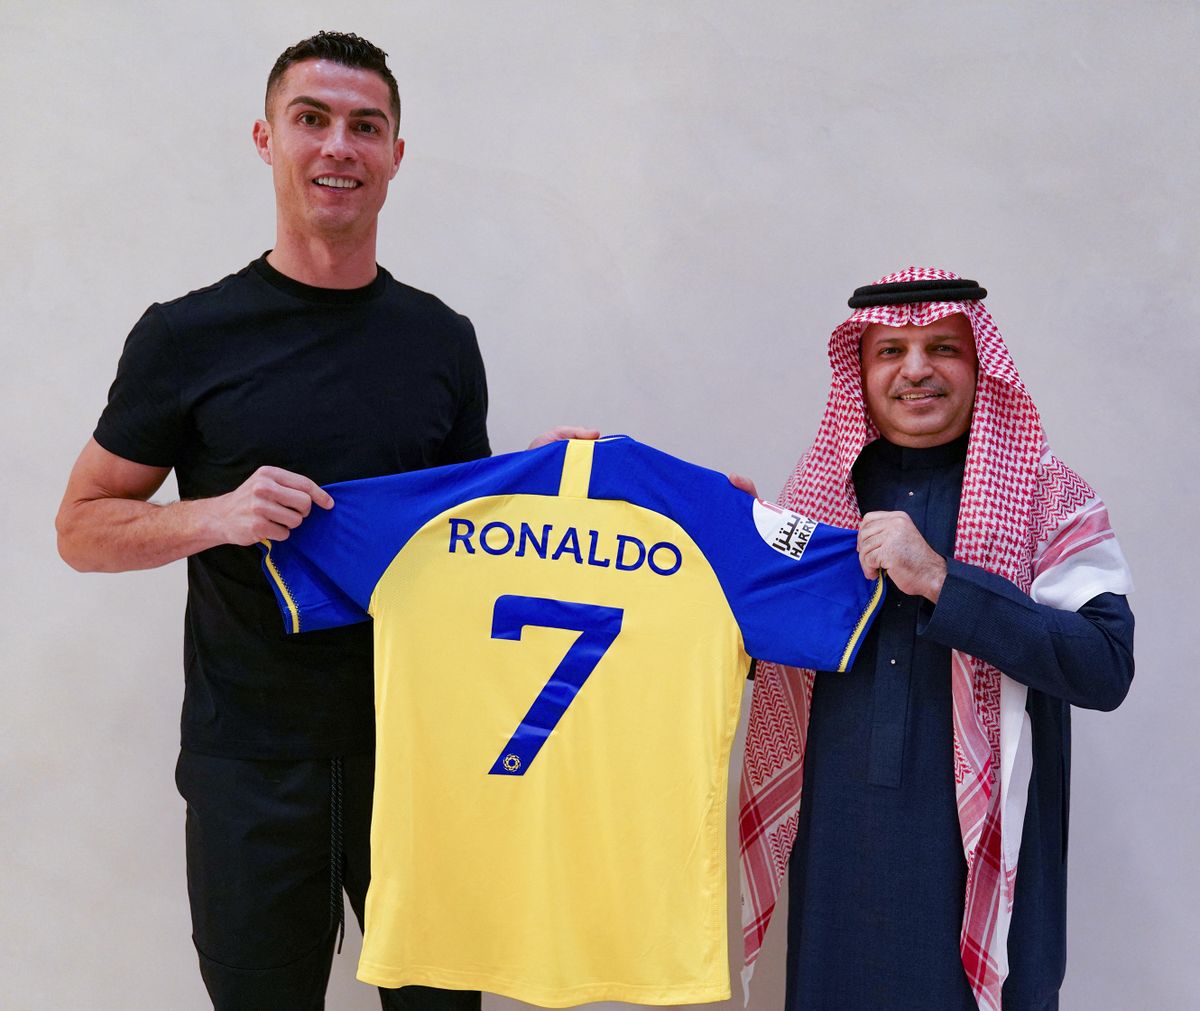 A handout picture released by Saudi Arabia's al-Nasr football club shows Portugal's forward Cristiano Ronaldo being presented with the club's number seven jersey by club president Musalli Al-Muammar in Madrid on December 30, 2022 upon signing for the Saudi Arabian club. - Cristiano Ronaldo on December 30 signed for al-Nasr of Saudi Arabia, the club announced, in a deal believed to be worth more than 200 million euros. The 37-year-old penned a con